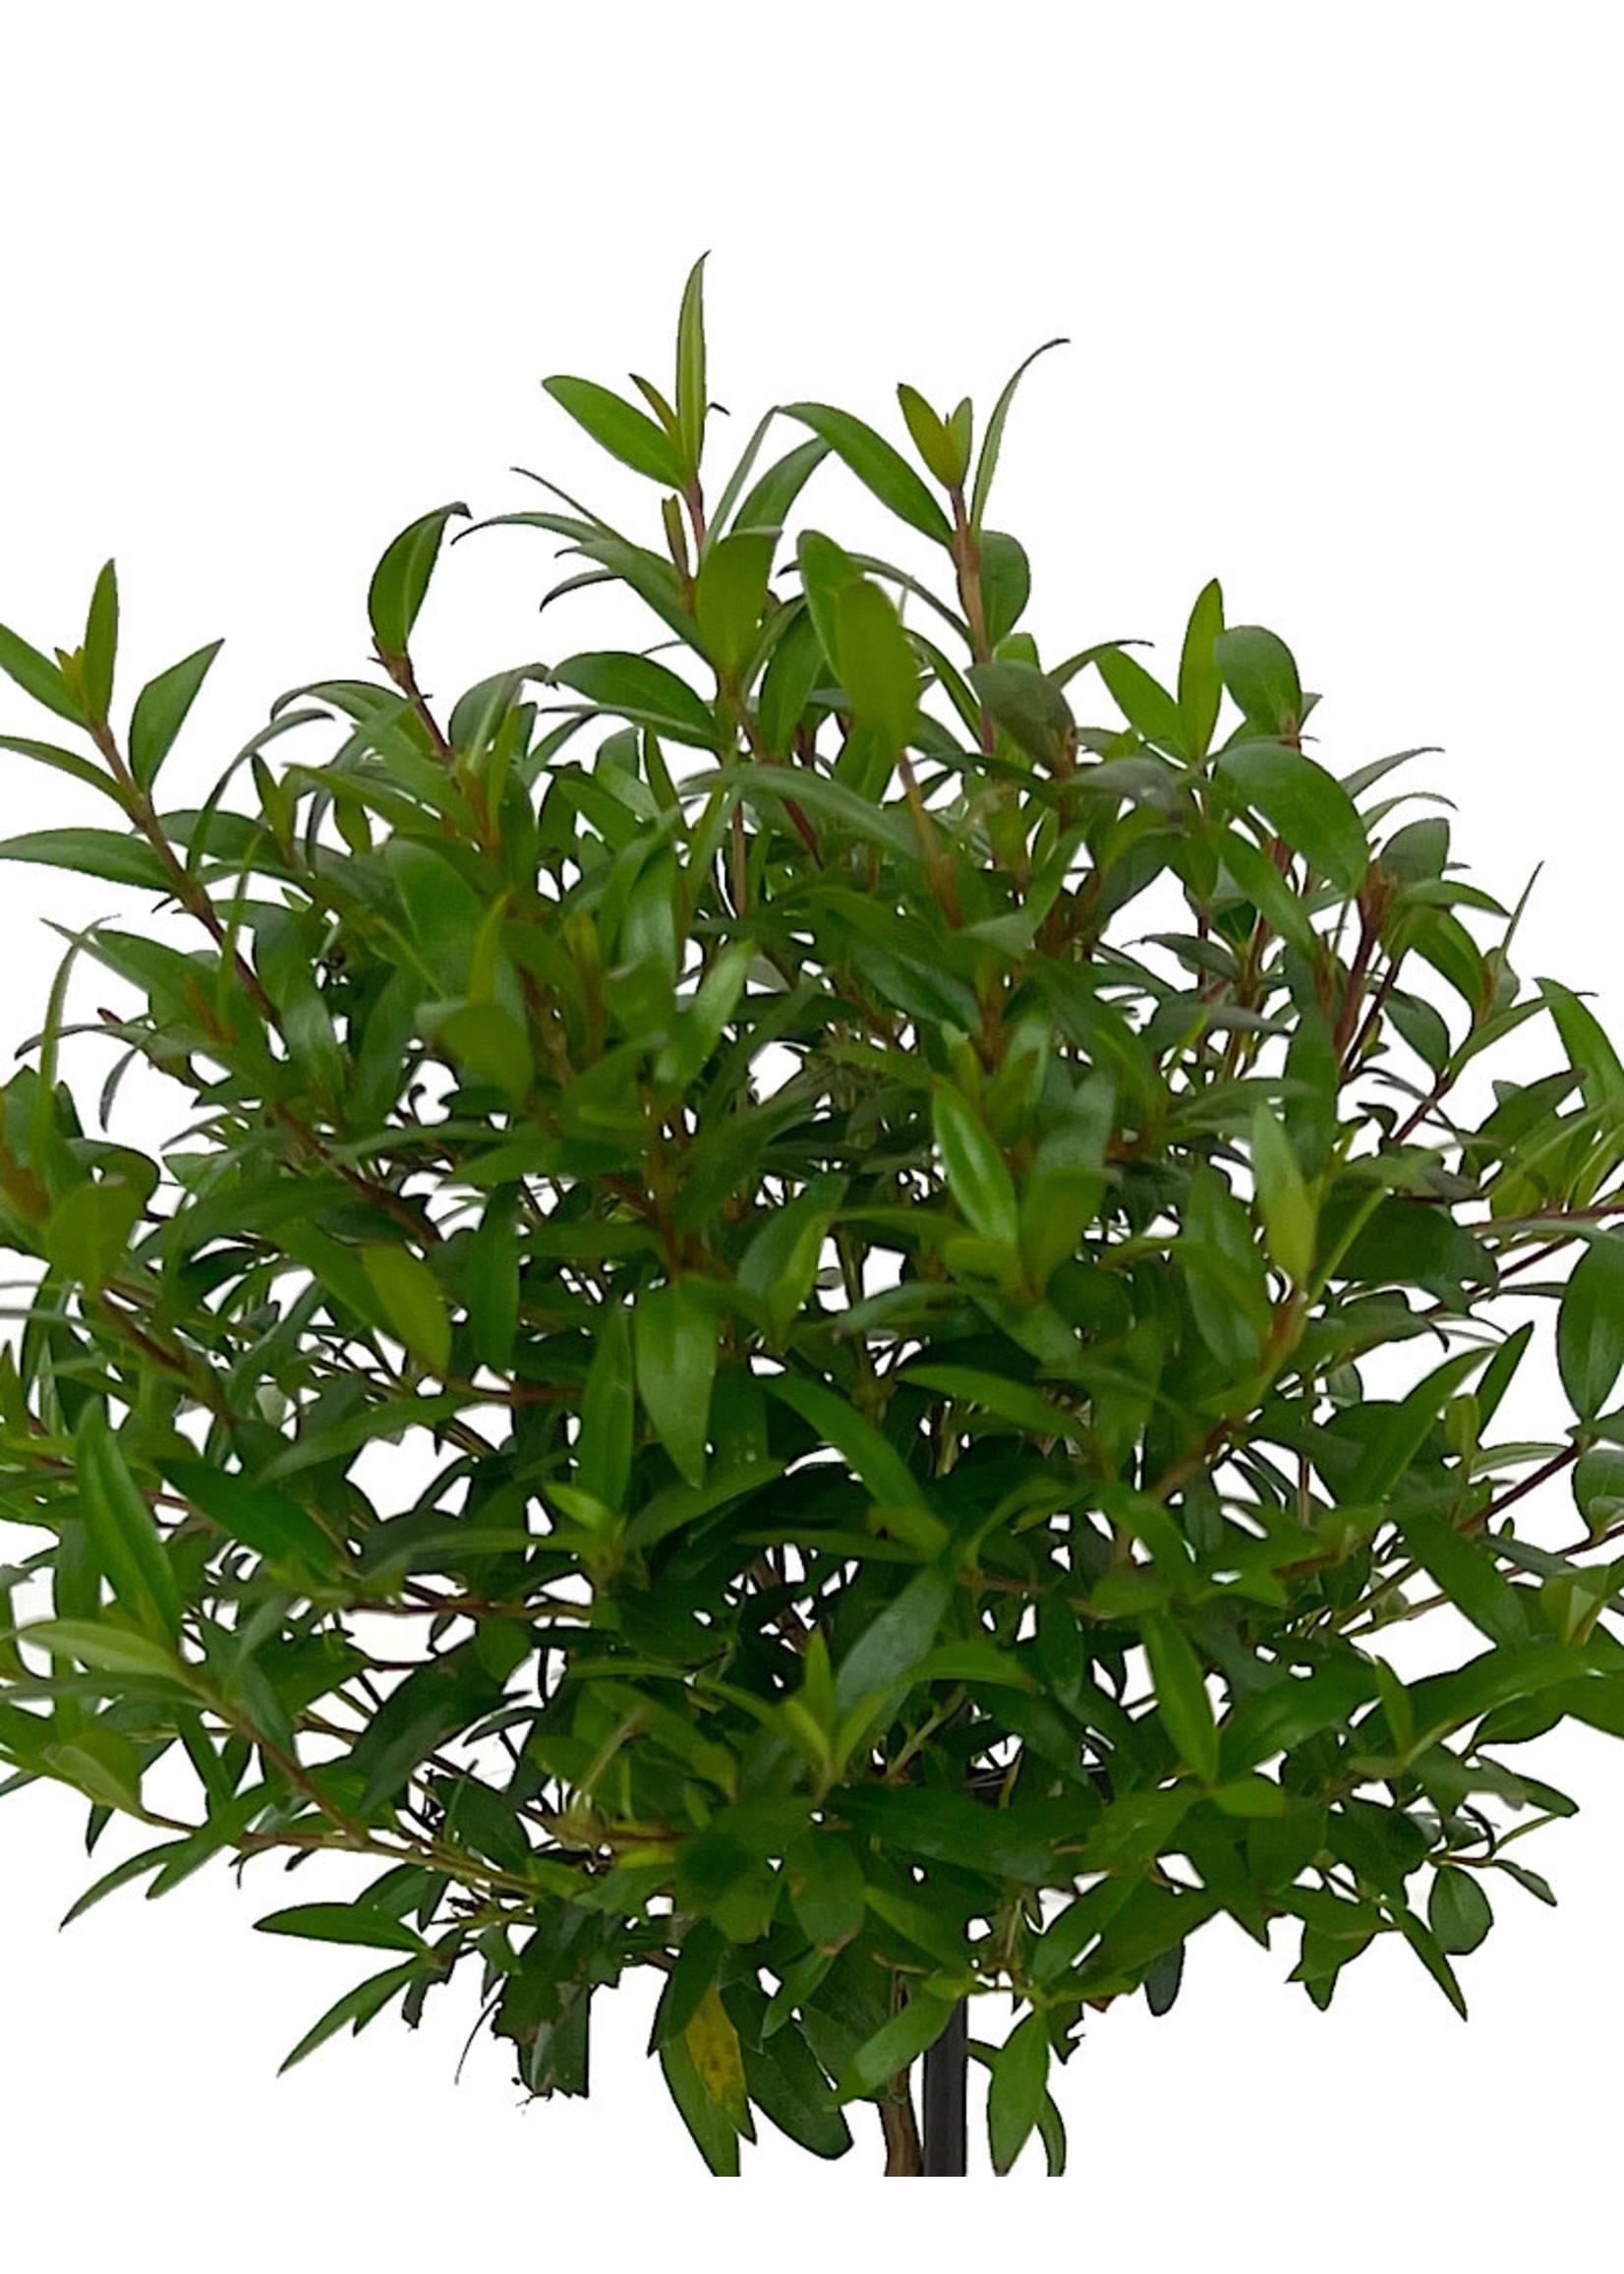 Myrtle communis 'Ball Topiary 5 Inch